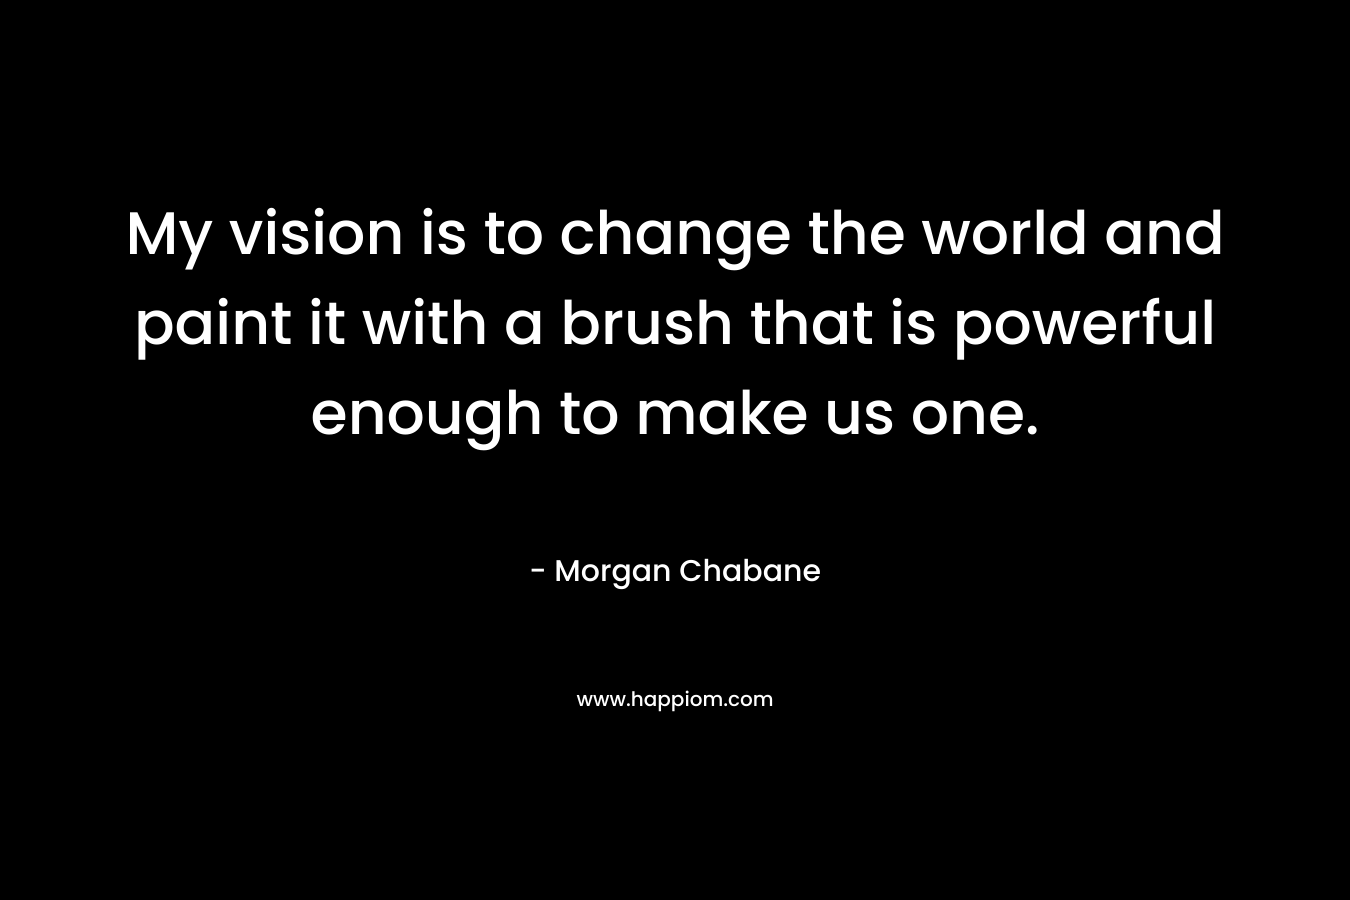 My vision is to change the world and paint it with a brush that is powerful enough to make us one.